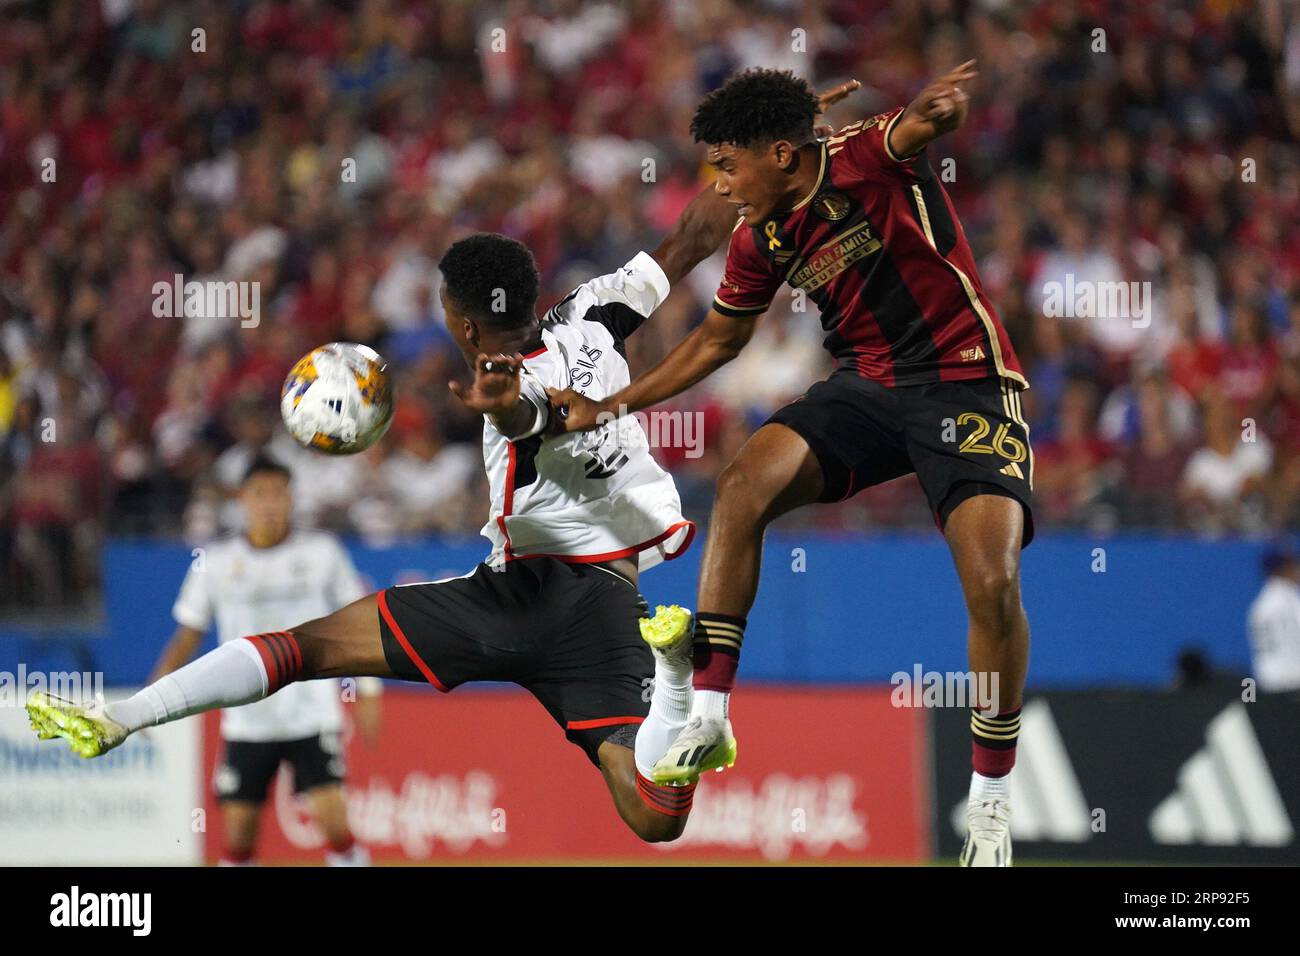 Frisco, USA. 02nd Sep, 2023. Frisco, Texas, United States: Geovane de Jesus Rocha (Dallas) and Caleb Wiley (Atlanta) clash in the air during the MLS game between FC Dallas and Atlanta United played at Toyota Stadium on Saturday September 2, 2023. (Photo by Javier Vicencio/Eyepix Group/Sipa USA) Credit: Sipa USA/Alamy Live News Stock Photo